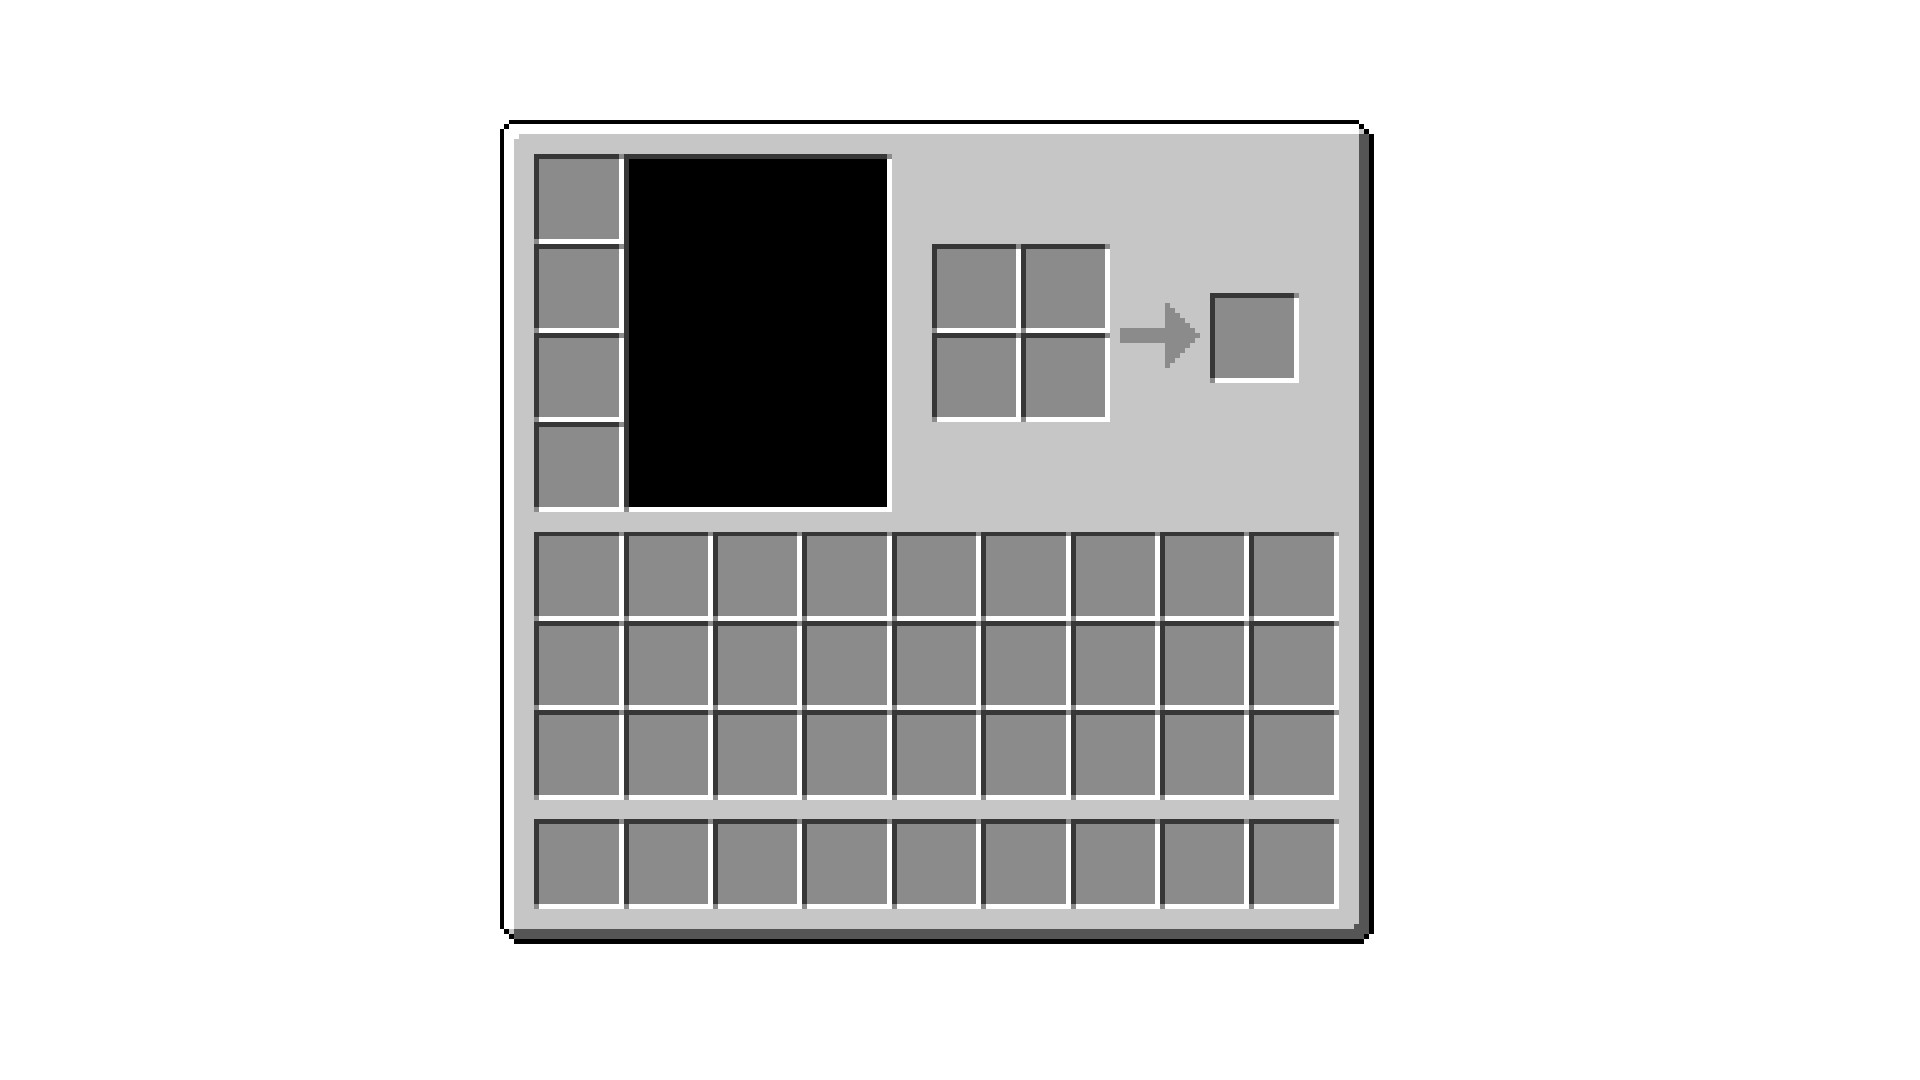 Minecraft Inventory Gui by lR